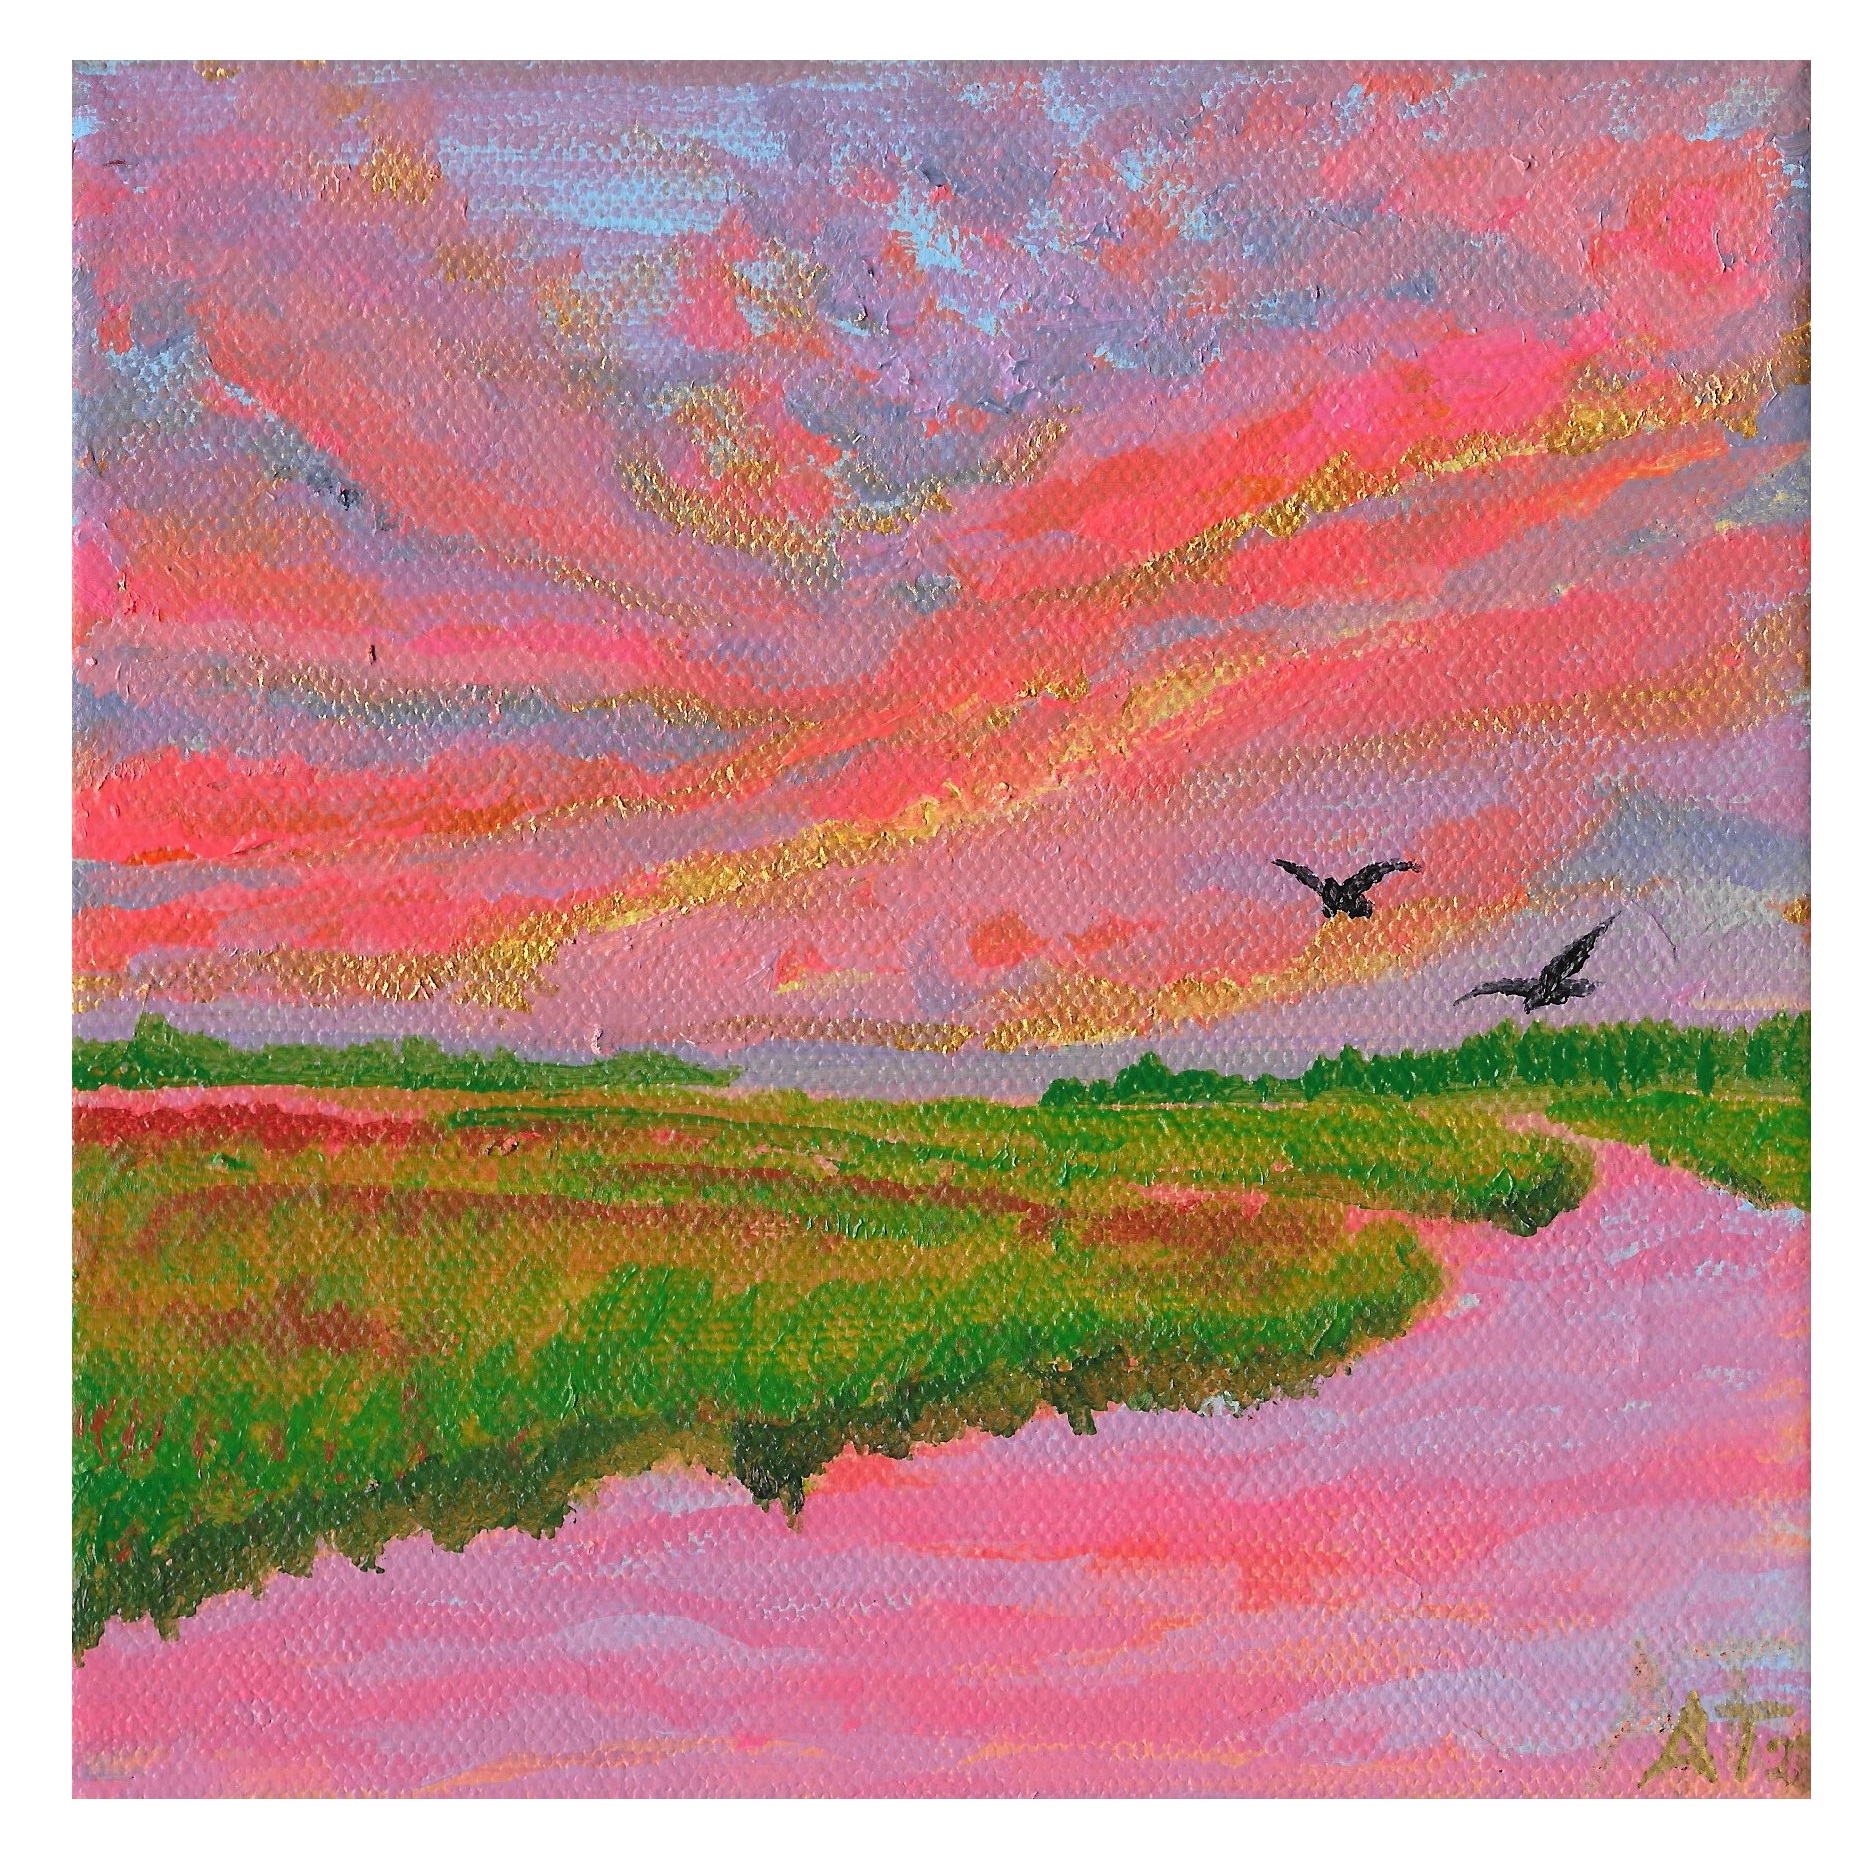 A vibrant pink acrylic painting depicting a vivid sunset over the marsh. The pink and lavender clouds edged with gold explode in stripes over a river of water cutting through the grassy green marsh. The water below reflects the cool pink and blue tones from the sunset. Two birds take flight from the right horizon line.